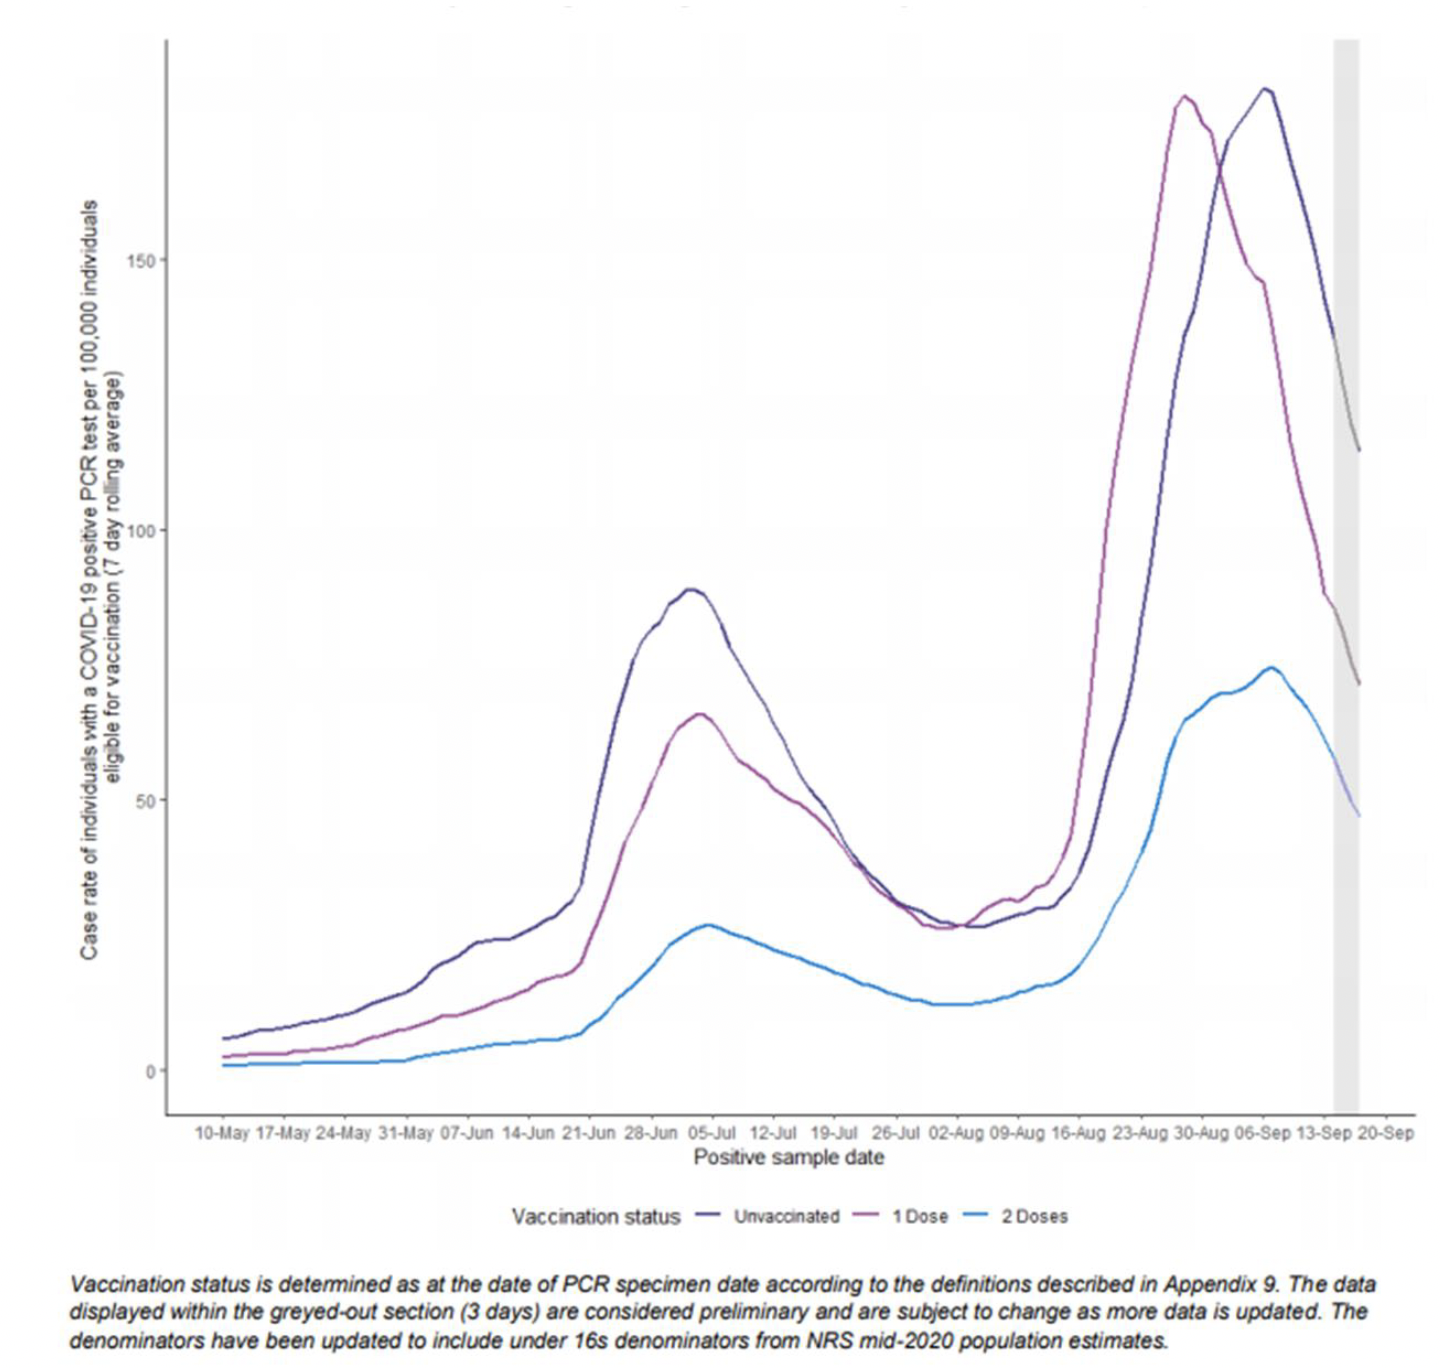 The chart shows the COVID-19 case numbers for unvaccinated, 1 Dose and 2 Dose individuals were at a very low level of under 10 per 100,000 on the 10 May. All showed an increase with a peak in early July, before dipping back down at the beginning of August and then increasing to a greater level than before in late August/early September. Unvaccinated and 1 dose cases per 100,000 are higher than 2 dose cases per 100,000  throughout. Unvaccinated peak at around 90 positive PCR tests per 100,000 in July and 180 per 100,000 in early September. 2 dose peak at around 25 per 100,000 in July and 70 per 100,000 in September. 1 dose peak at around 65 per 100,000 in July and 180 per 100,000 in September. 